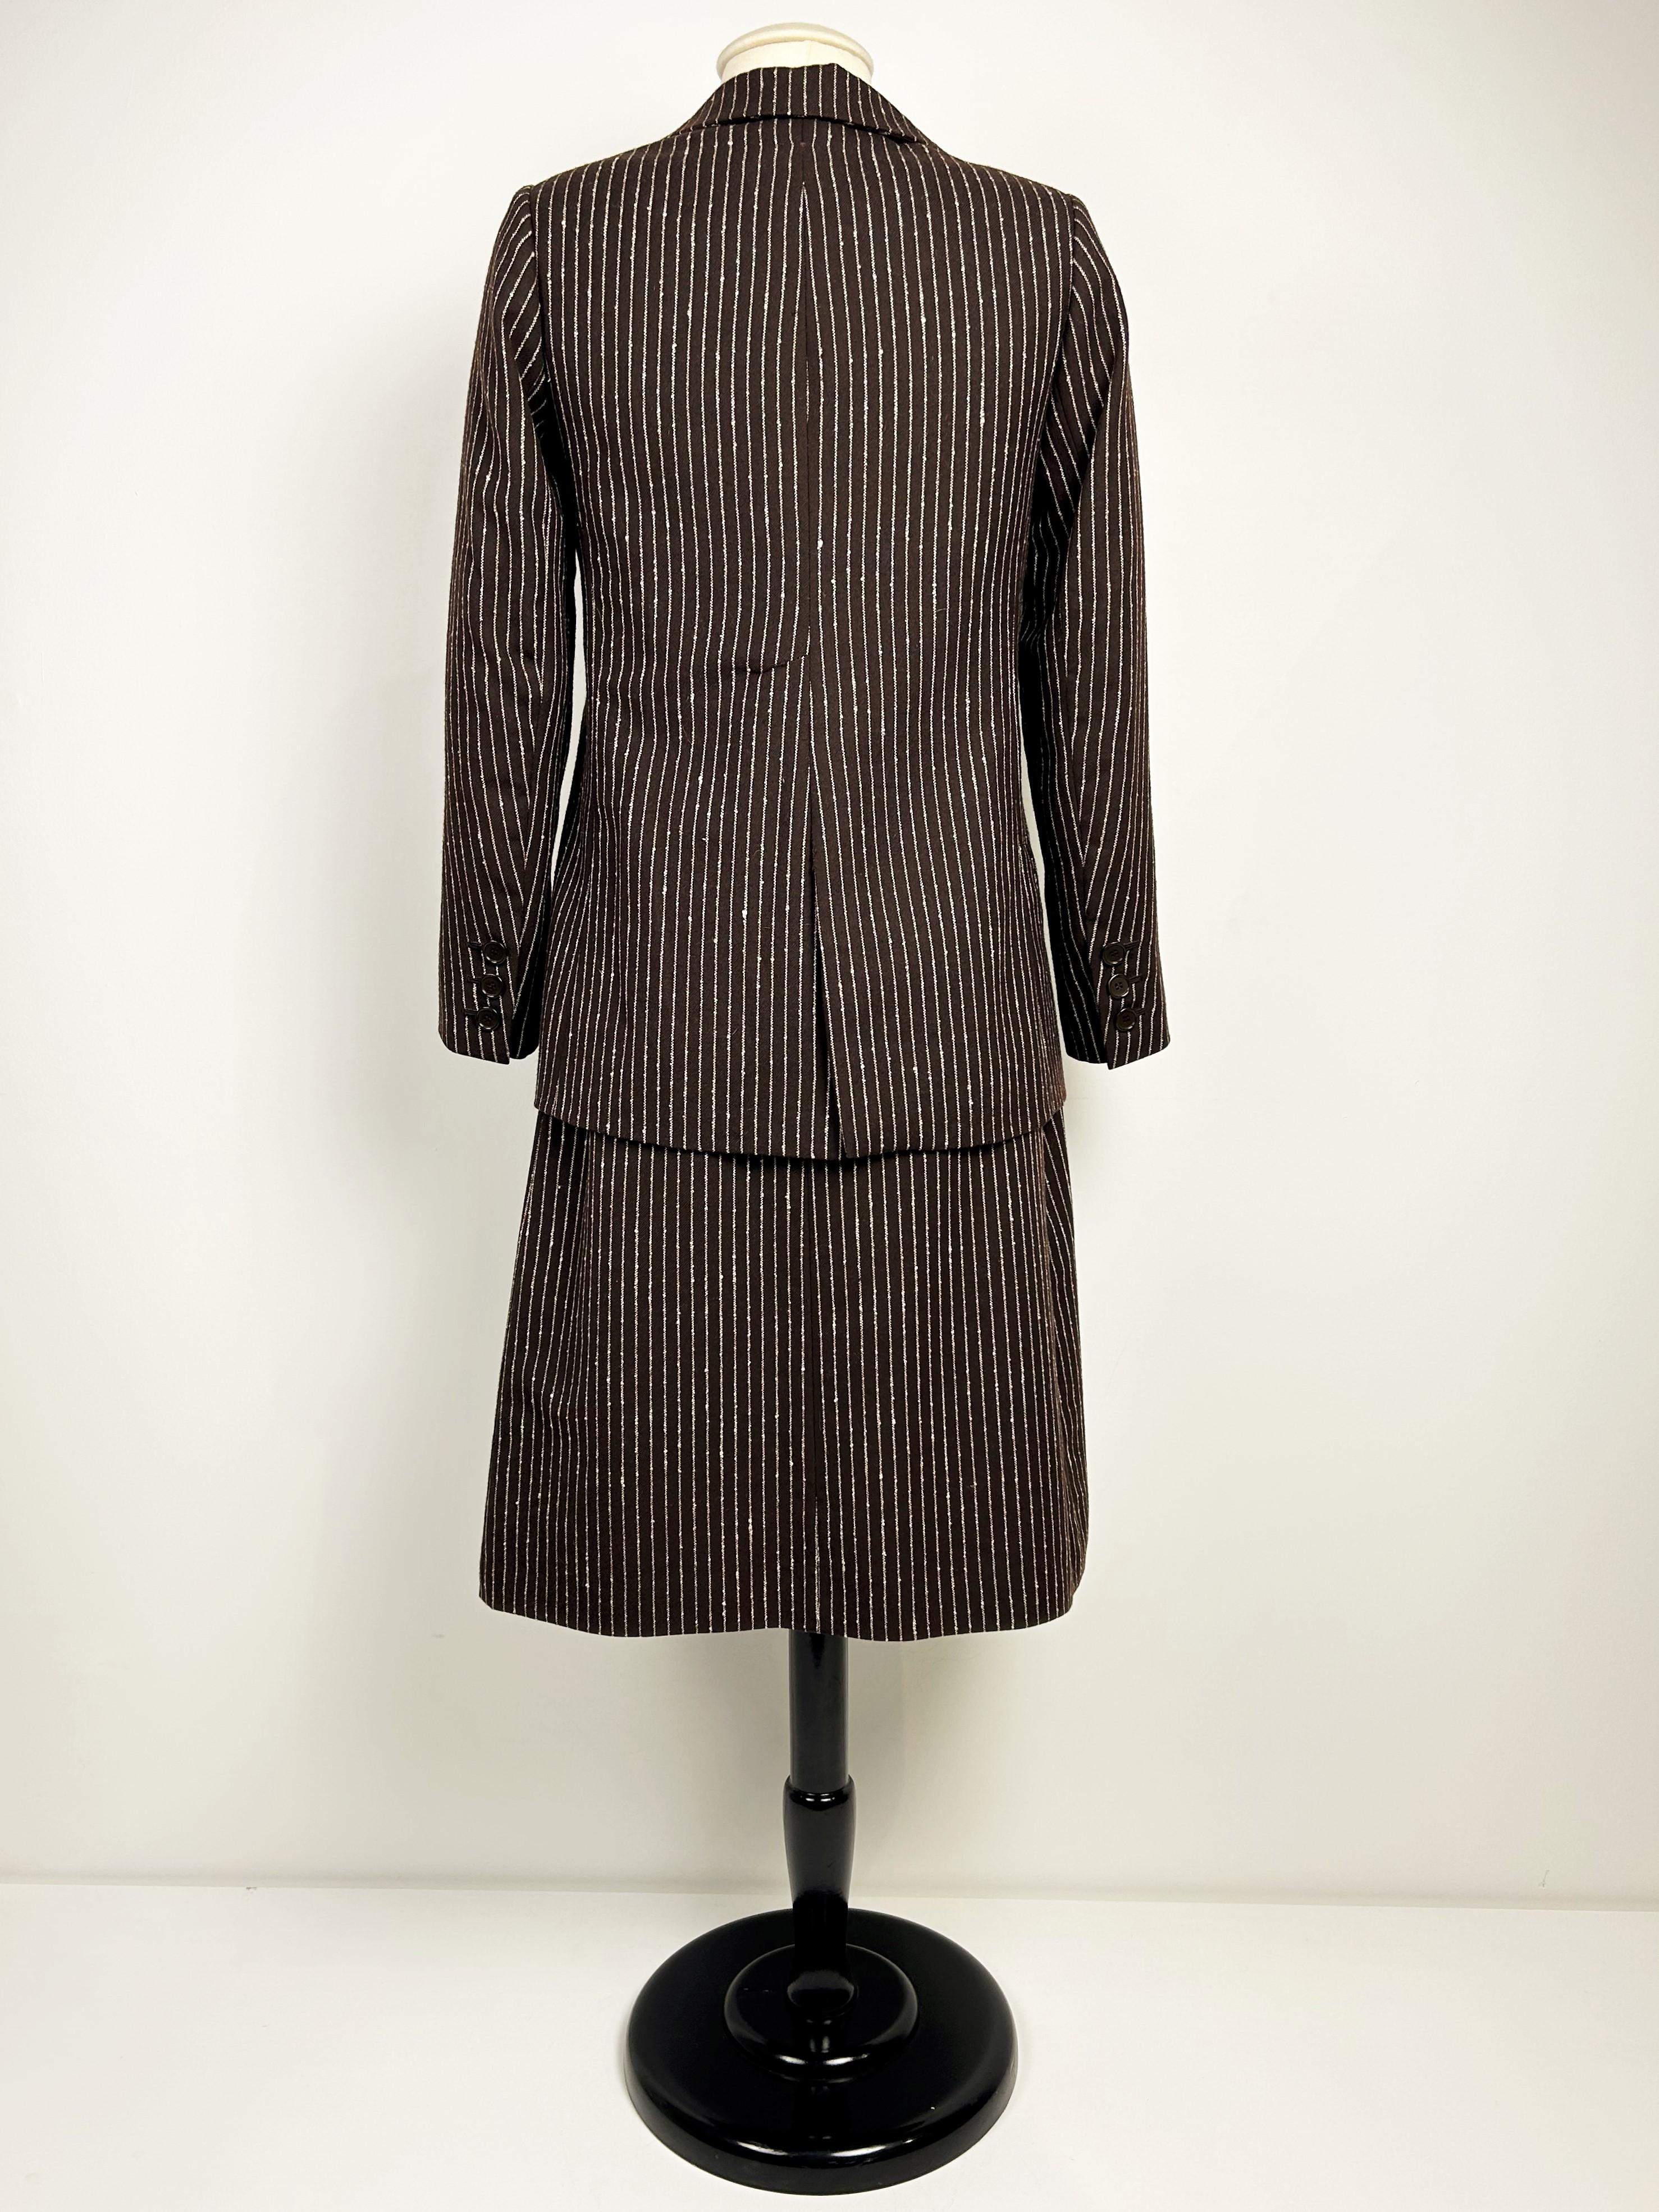 Yves Saint Laurent Haute Couture skirt-suit numbered 14539 Circa 1967/1970 For Sale 10